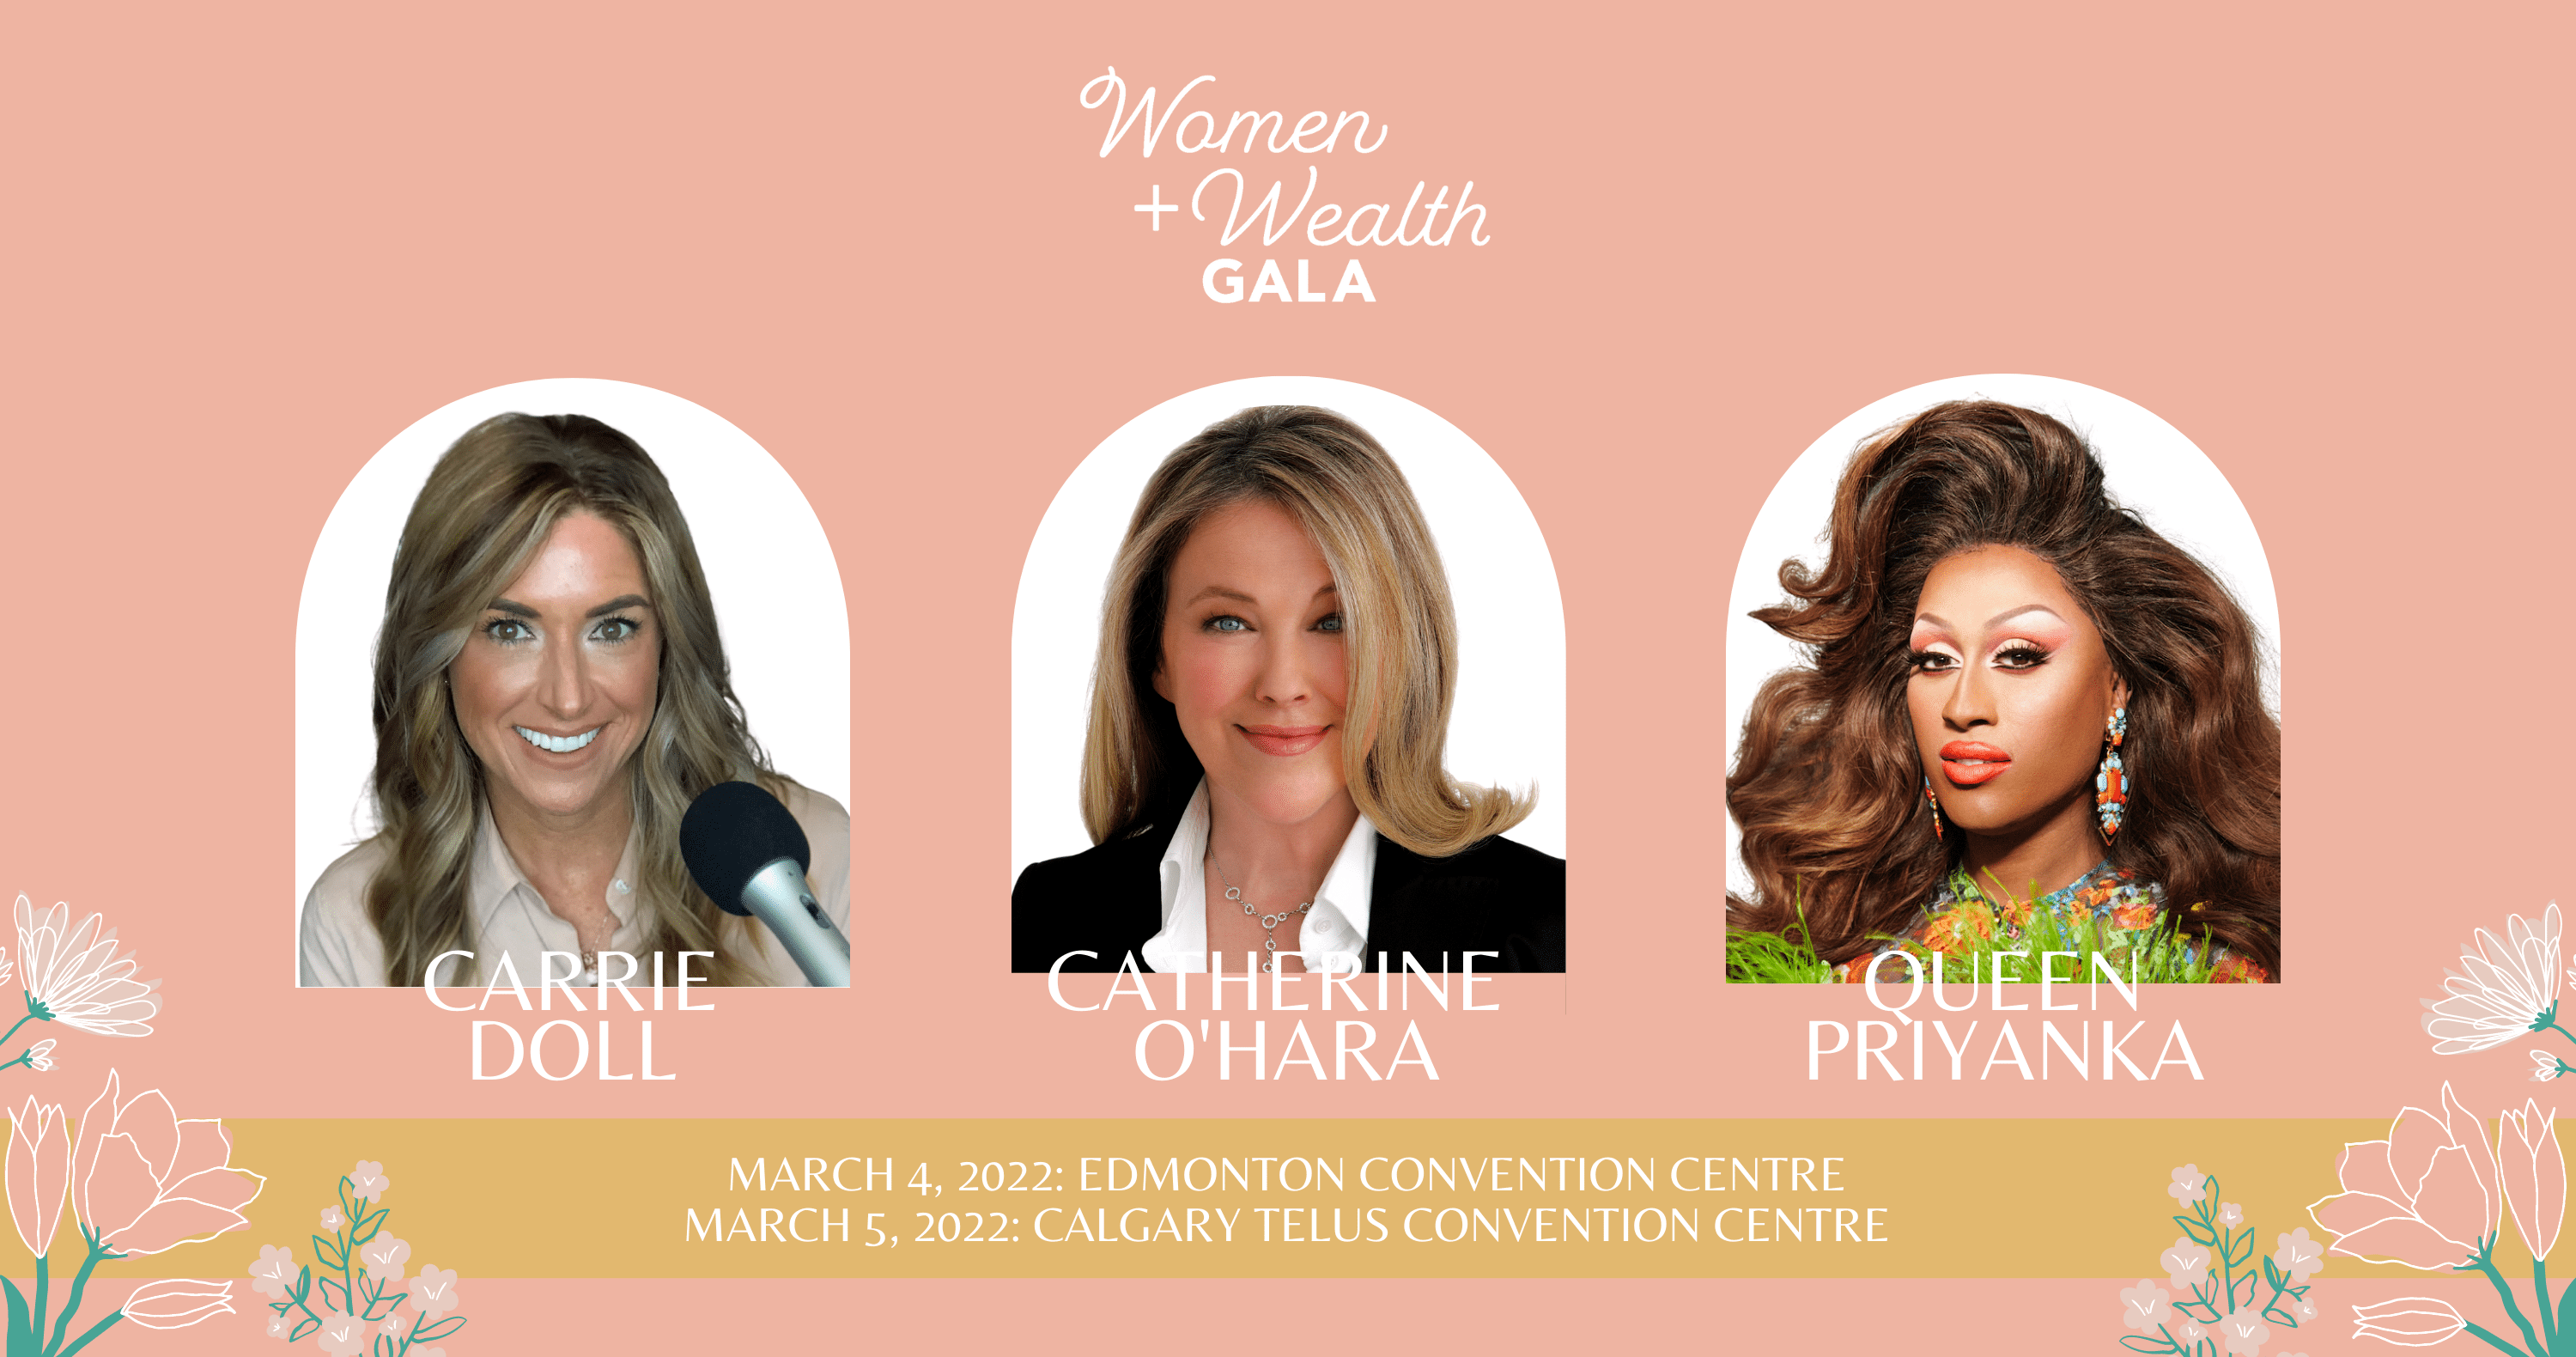 Women and Wealth gala image showing Carrie Doll, Catherine O'Hara and Queen Priyanka